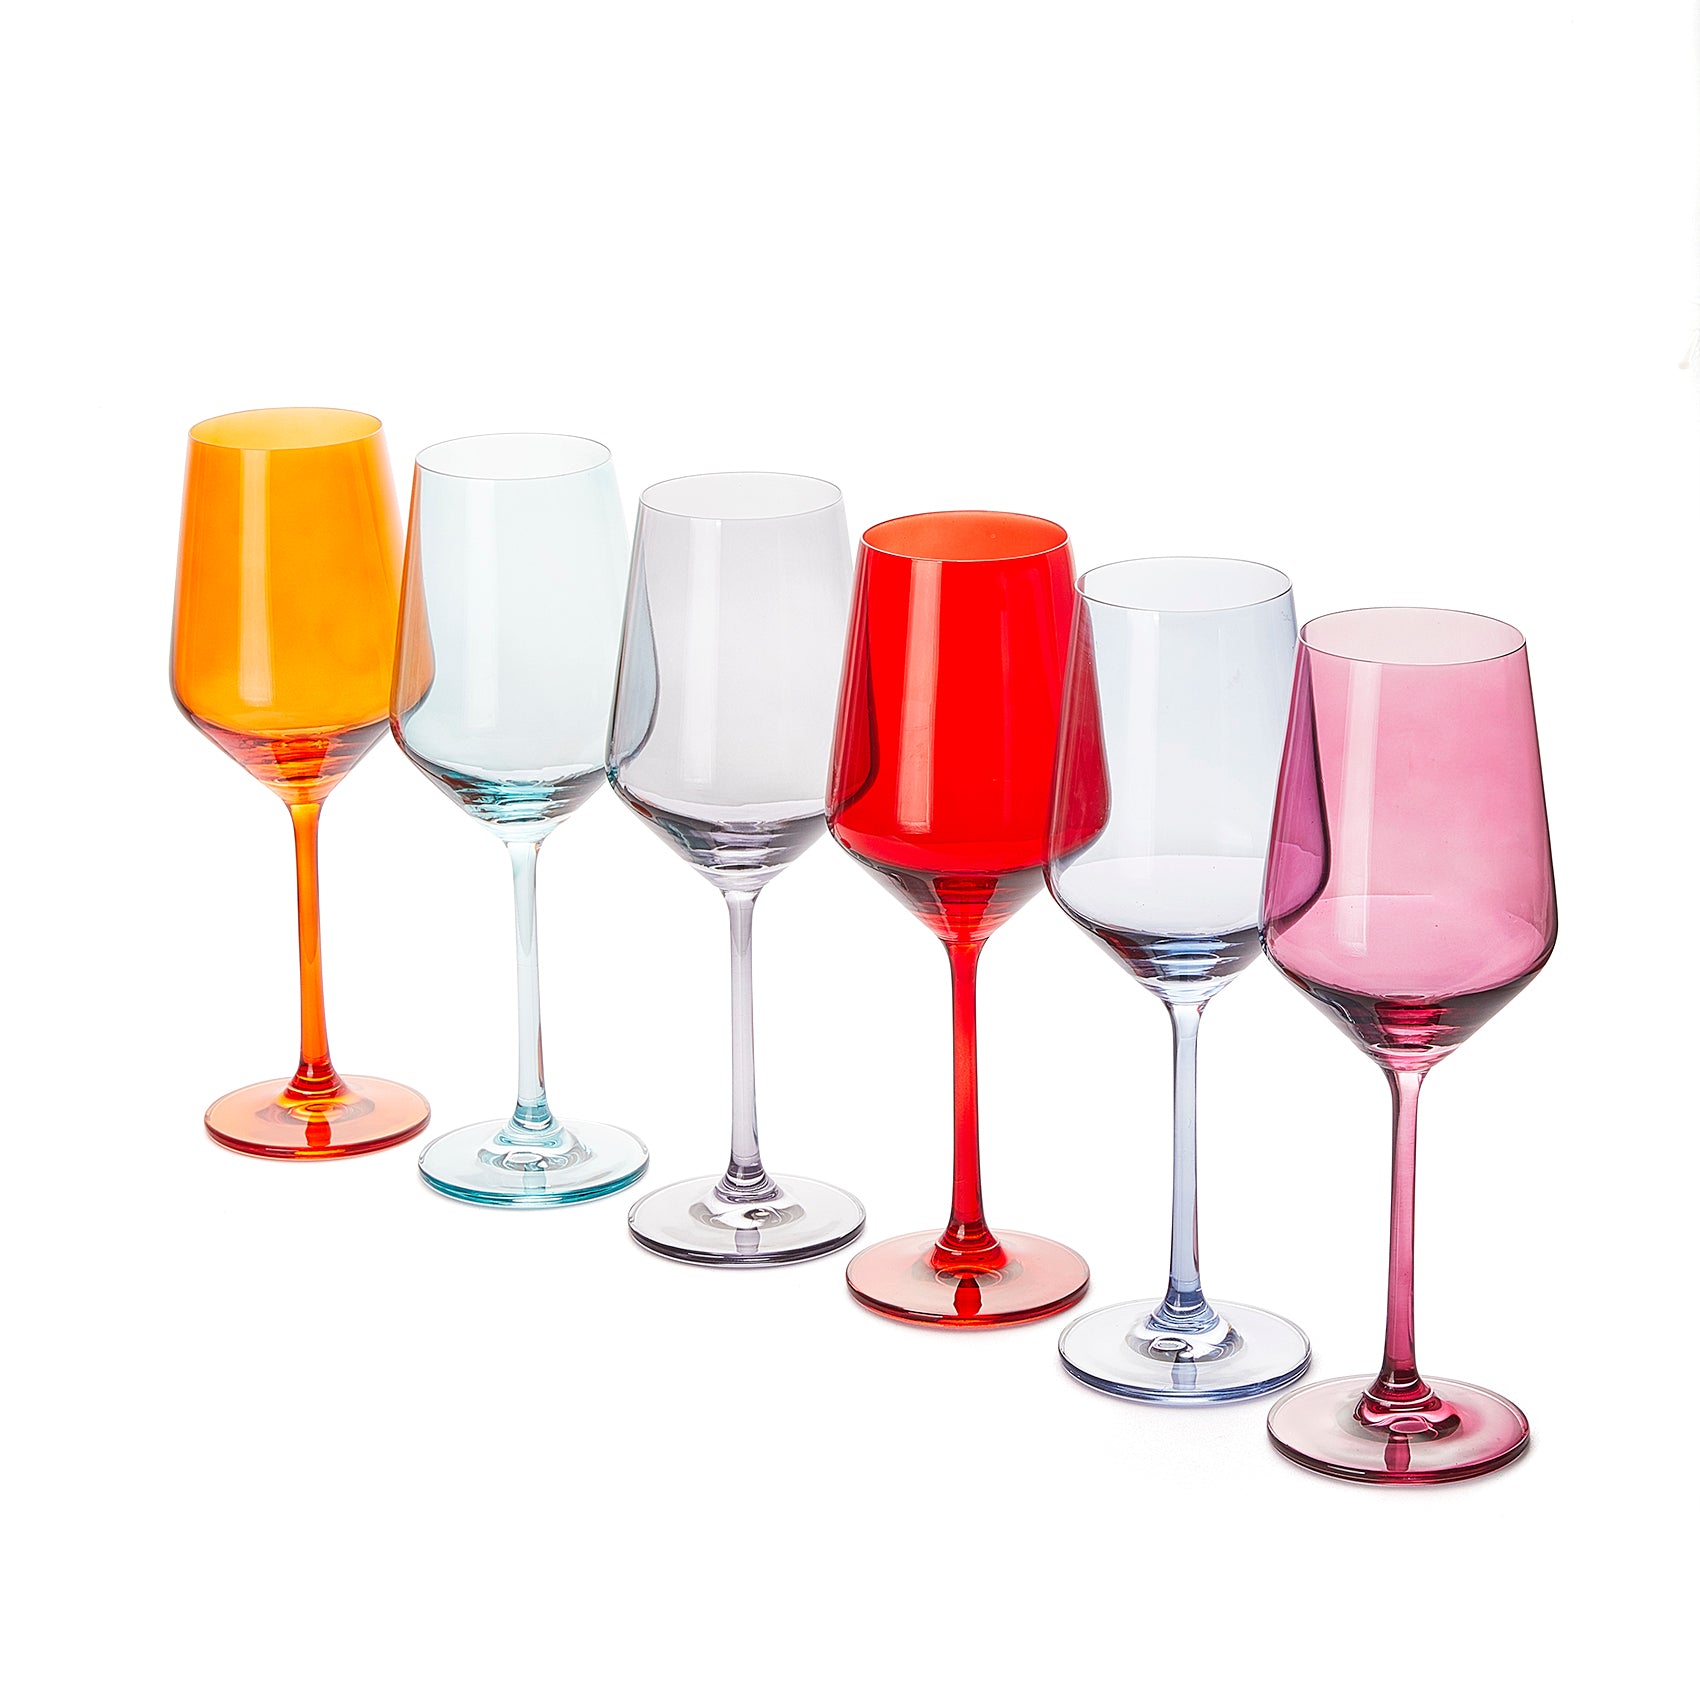 Colored Wine Glass Set, Large 12oz Bubble Glasses Set of 6, Unique Italian  Style Tall for White & Re…See more Colored Wine Glass Set, Large 12oz